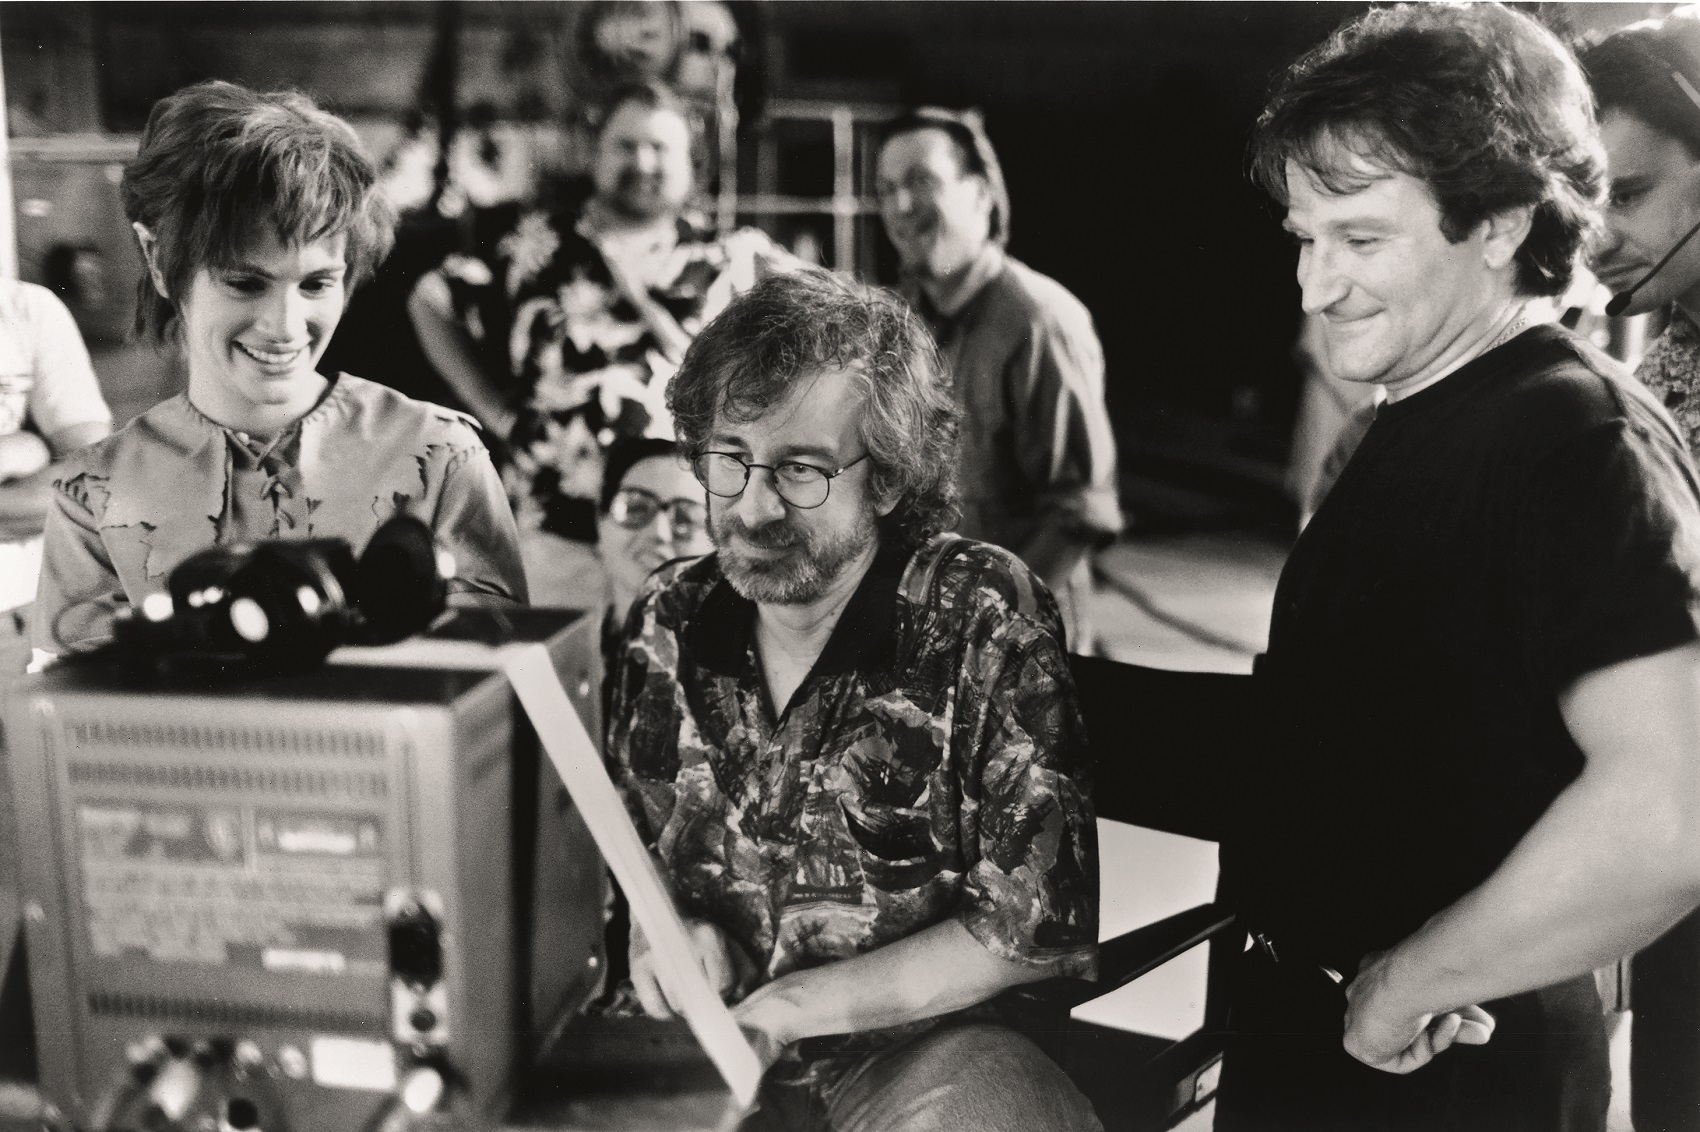 Hook (1991) 
Behind the scenes photo of Julia Roberts, Steven Spielberg & Robin Williams
*Filmstill - Editorial Use Only*,Image: 363276263, License: Rights-managed, Restrictions: Filmstill // HANDOUT / EDITORIAL USE ONLY!
Please note: Fees charged by the agency are for the agencyÕs services only, and do not, nor are they intended to, convey to the user any ownership of Copyright or License in the material. The agency does not claim any ownership including but not limited to Copyright or License in the attached material. By publishing this material you expressly agree to indemnify and to hold the agency and its directors, shareholders and employees harmless from any loss, claims, damages, demands, expenses (including legal fees), or any causes of action or allegation against the agency arising out of or connected in any way with publication of the material. Images should only be used in connection with the event/movie (etc), e.g.:
Real Name as Character Name in Film Title (year).
Filmstill // HANDOUT / EDITORIAL USE ONLY!
Please note: Fees charged by the agency are for the agency’s services only, and do not, nor are they intended to, convey to the user any ownership of Copyright or License in the material. The agency does not claim any ownership including but not limited to Copyright or License in the attached material. By publishing this material you expressly agree to indemnify and to hold the agency and its directors, shareholders and employees harmless from any loss, claims, damages, demands, expenses (including legal fees), or any causes of action or allegation against the agency arising out of or connected in any way with publication of the material. Images should only be used in connection with the event/movie (etc), e.g.:
Real Name as Character Name in Film Title (year)., Model Release: no, Credit line: Image  Capital Pictures / Film Stills / Profimedia